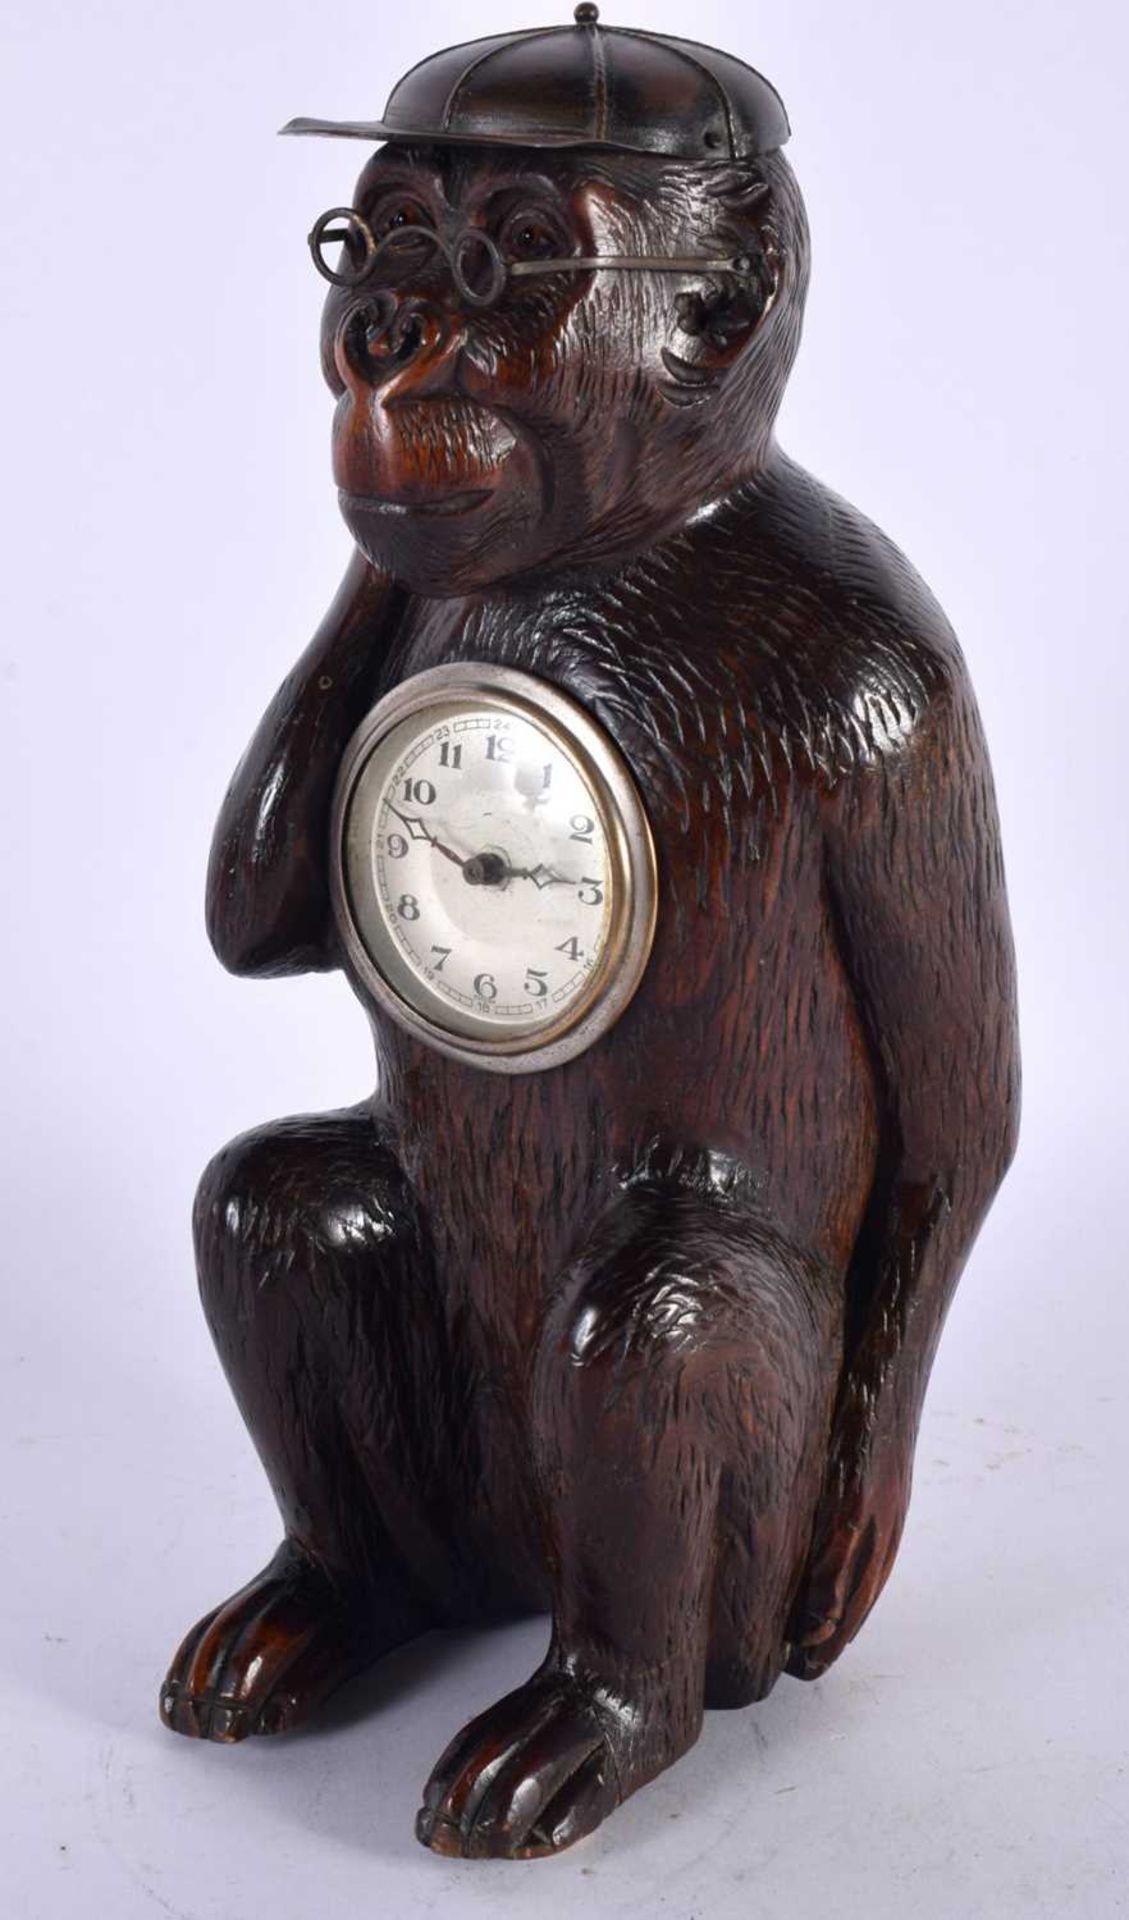 AN UNUSUAL LATE 19TH CENTURY BAVARIAN BLACK FOREST CARVED LINDEN WOOD CLOCK formed as a seated